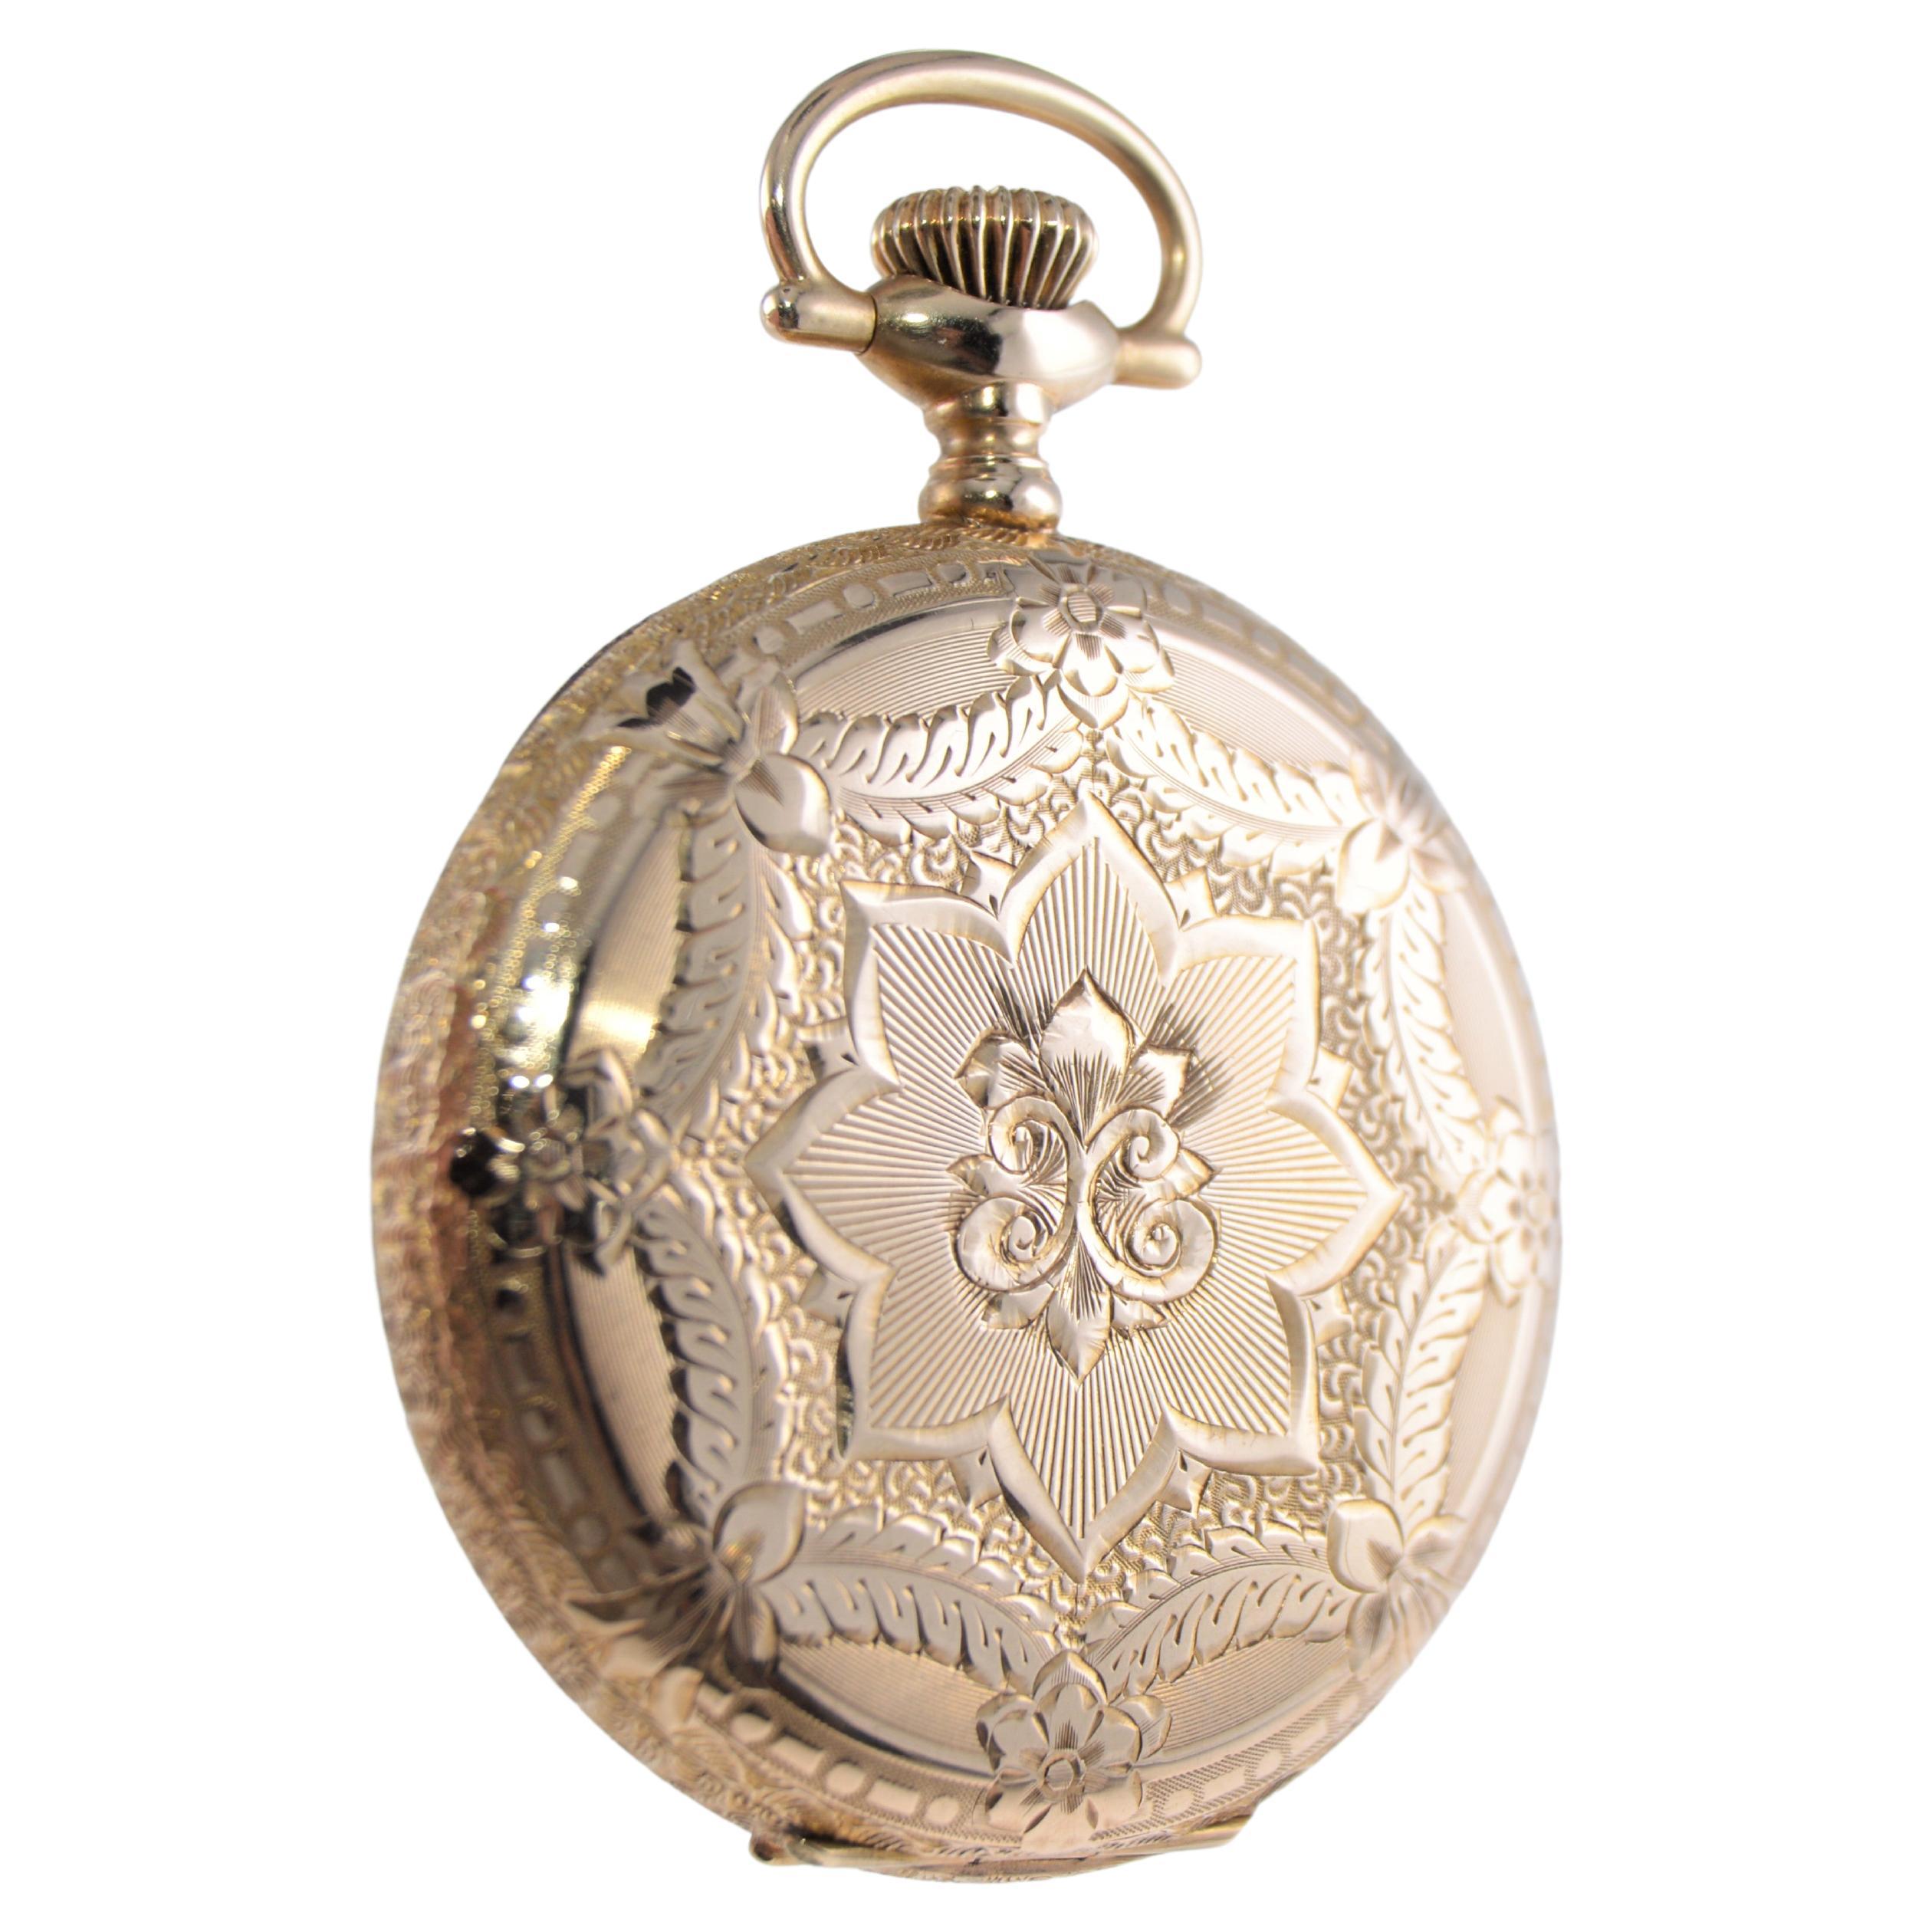 Art Nouveau Waltham 14k Yellow Gold Hunters Cased Pocket Watch Circa 1900 Hand Engraved For Sale